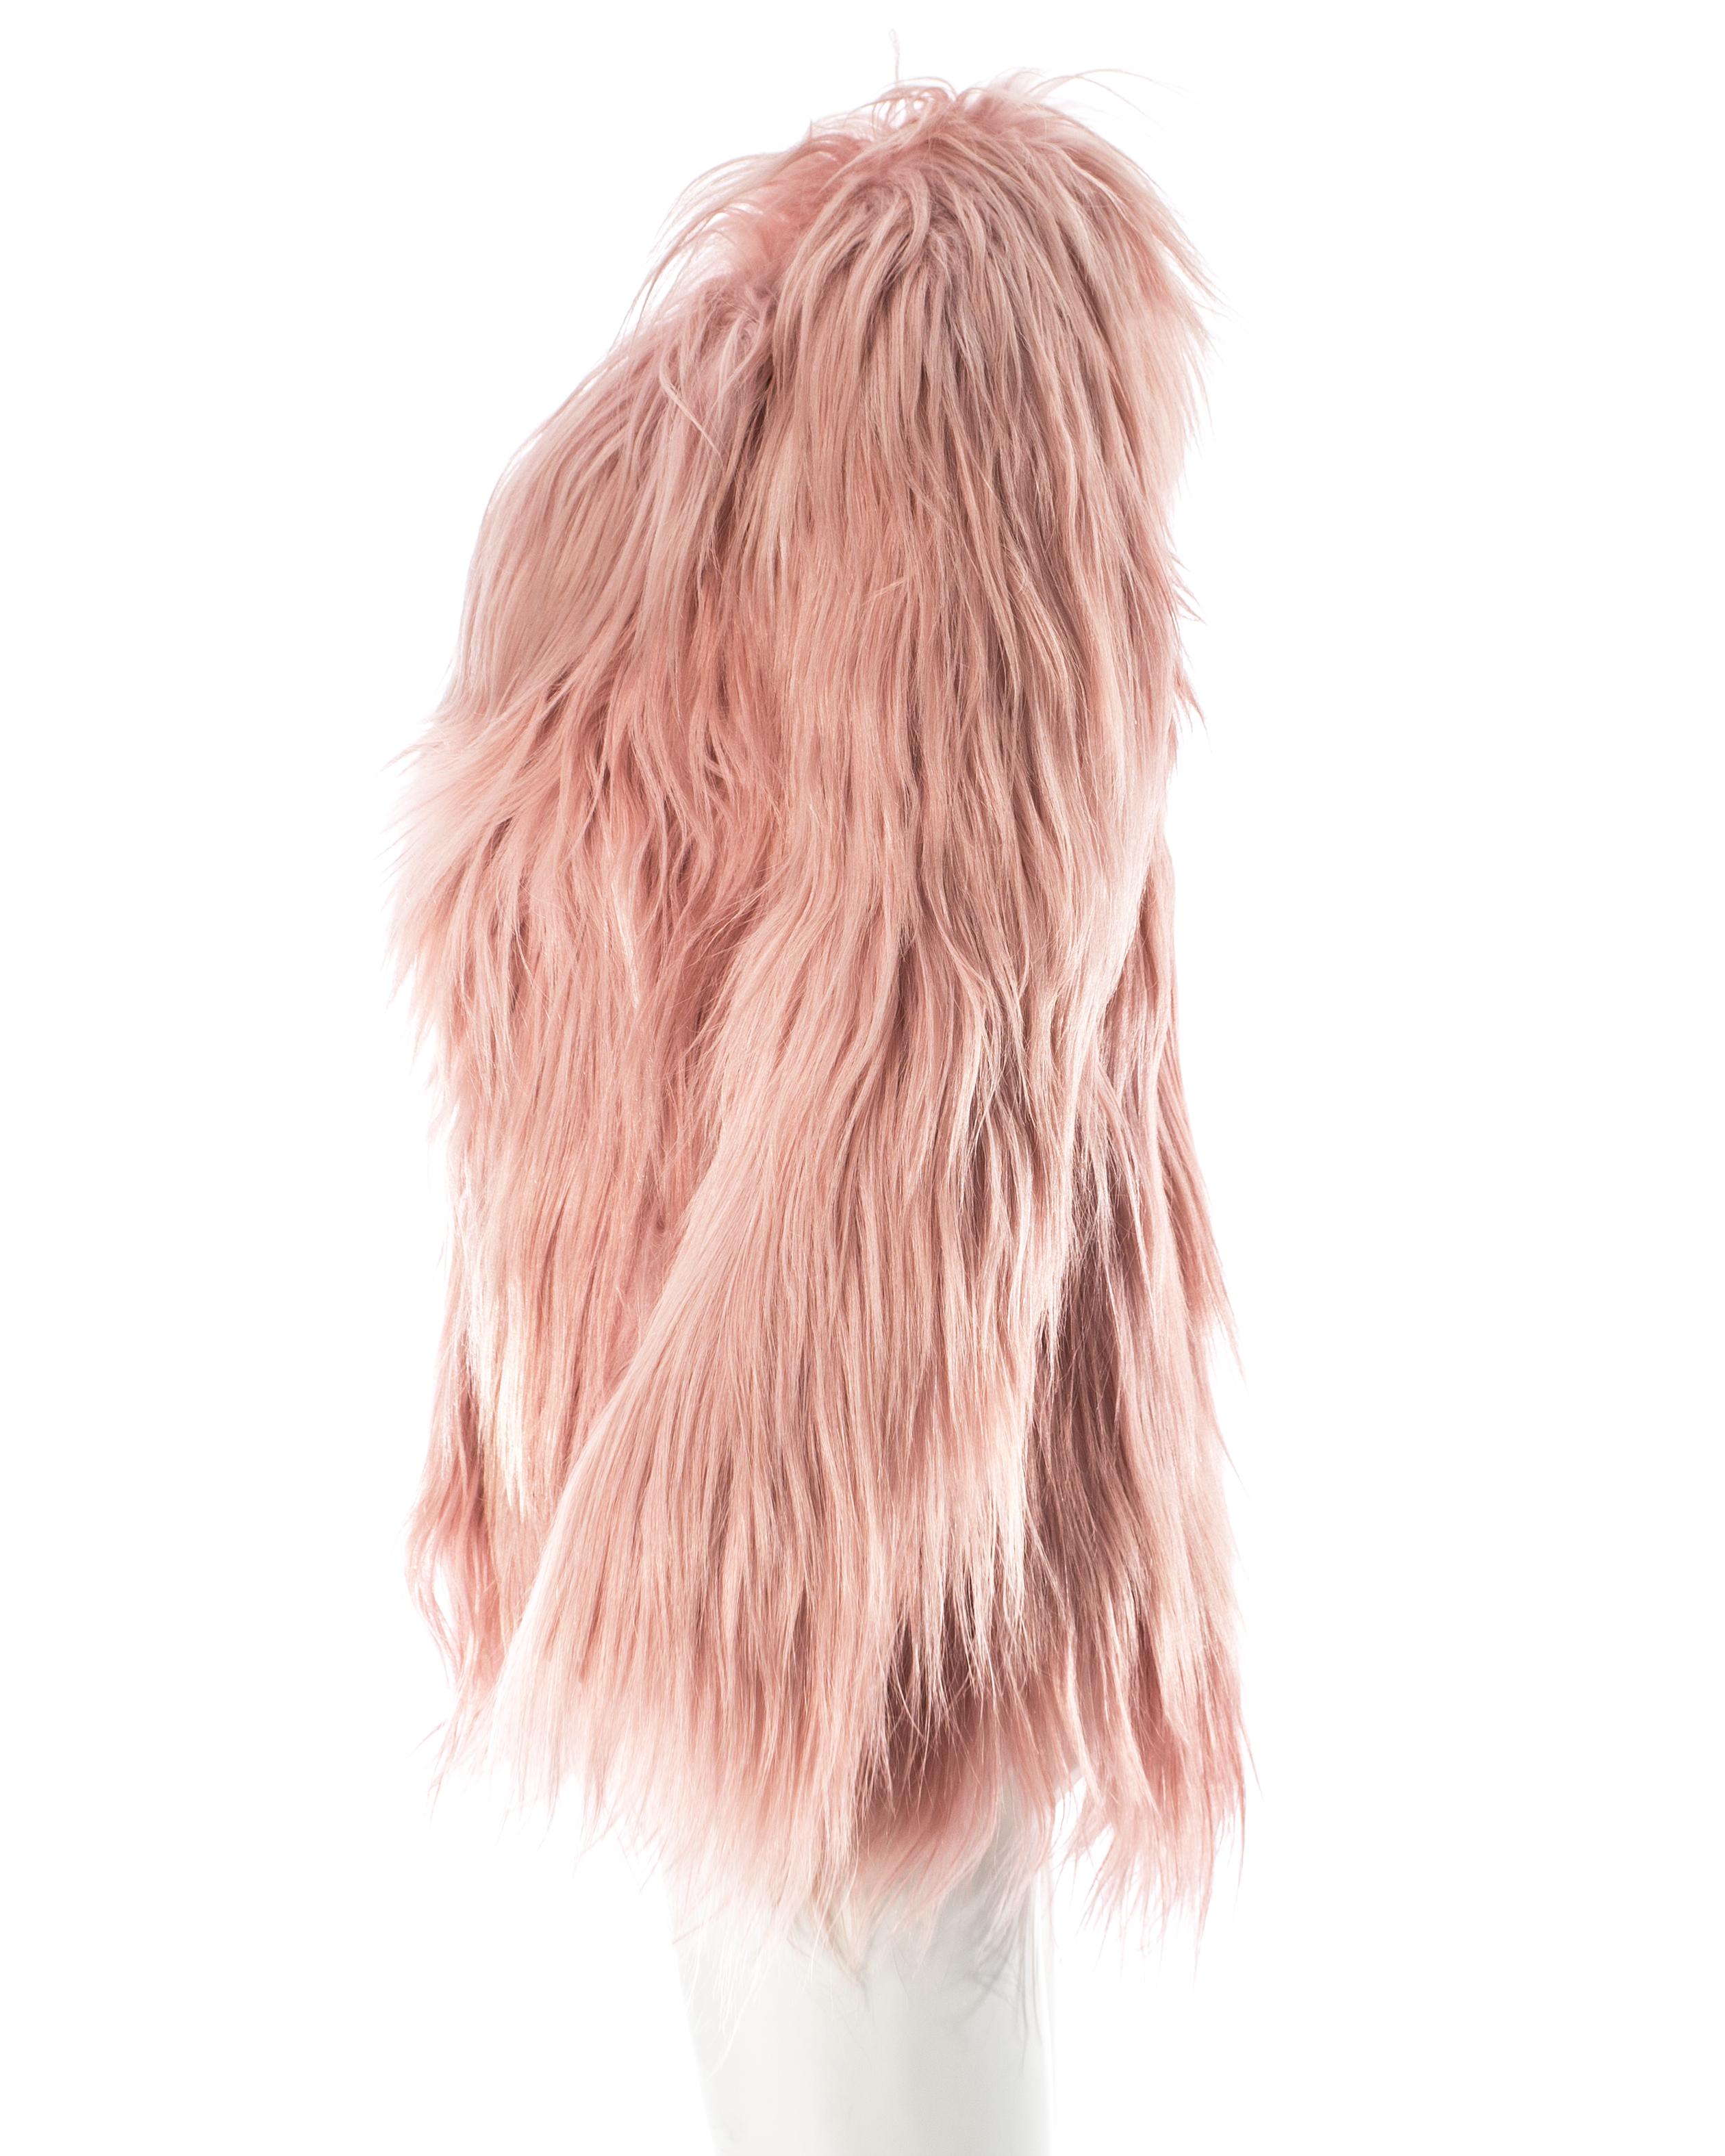 Beige Gucci dusty pink goat hair jacket, AW 2014 